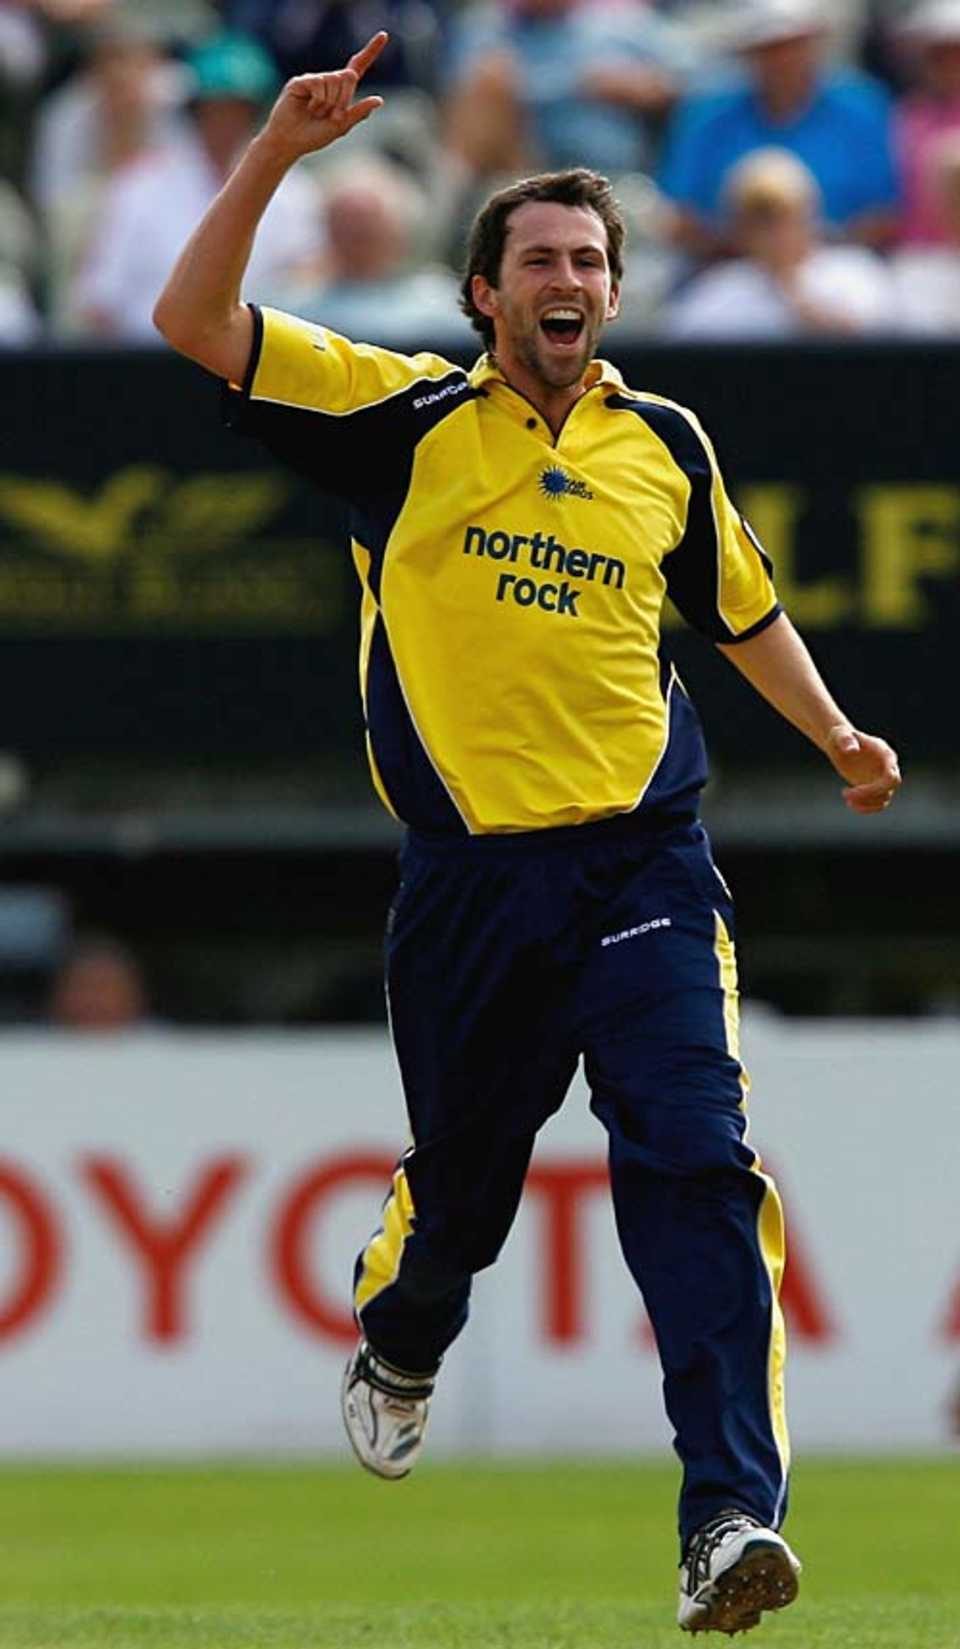 Graham Onions celebrates a wicket on the day he was called-up to the England one-day squad